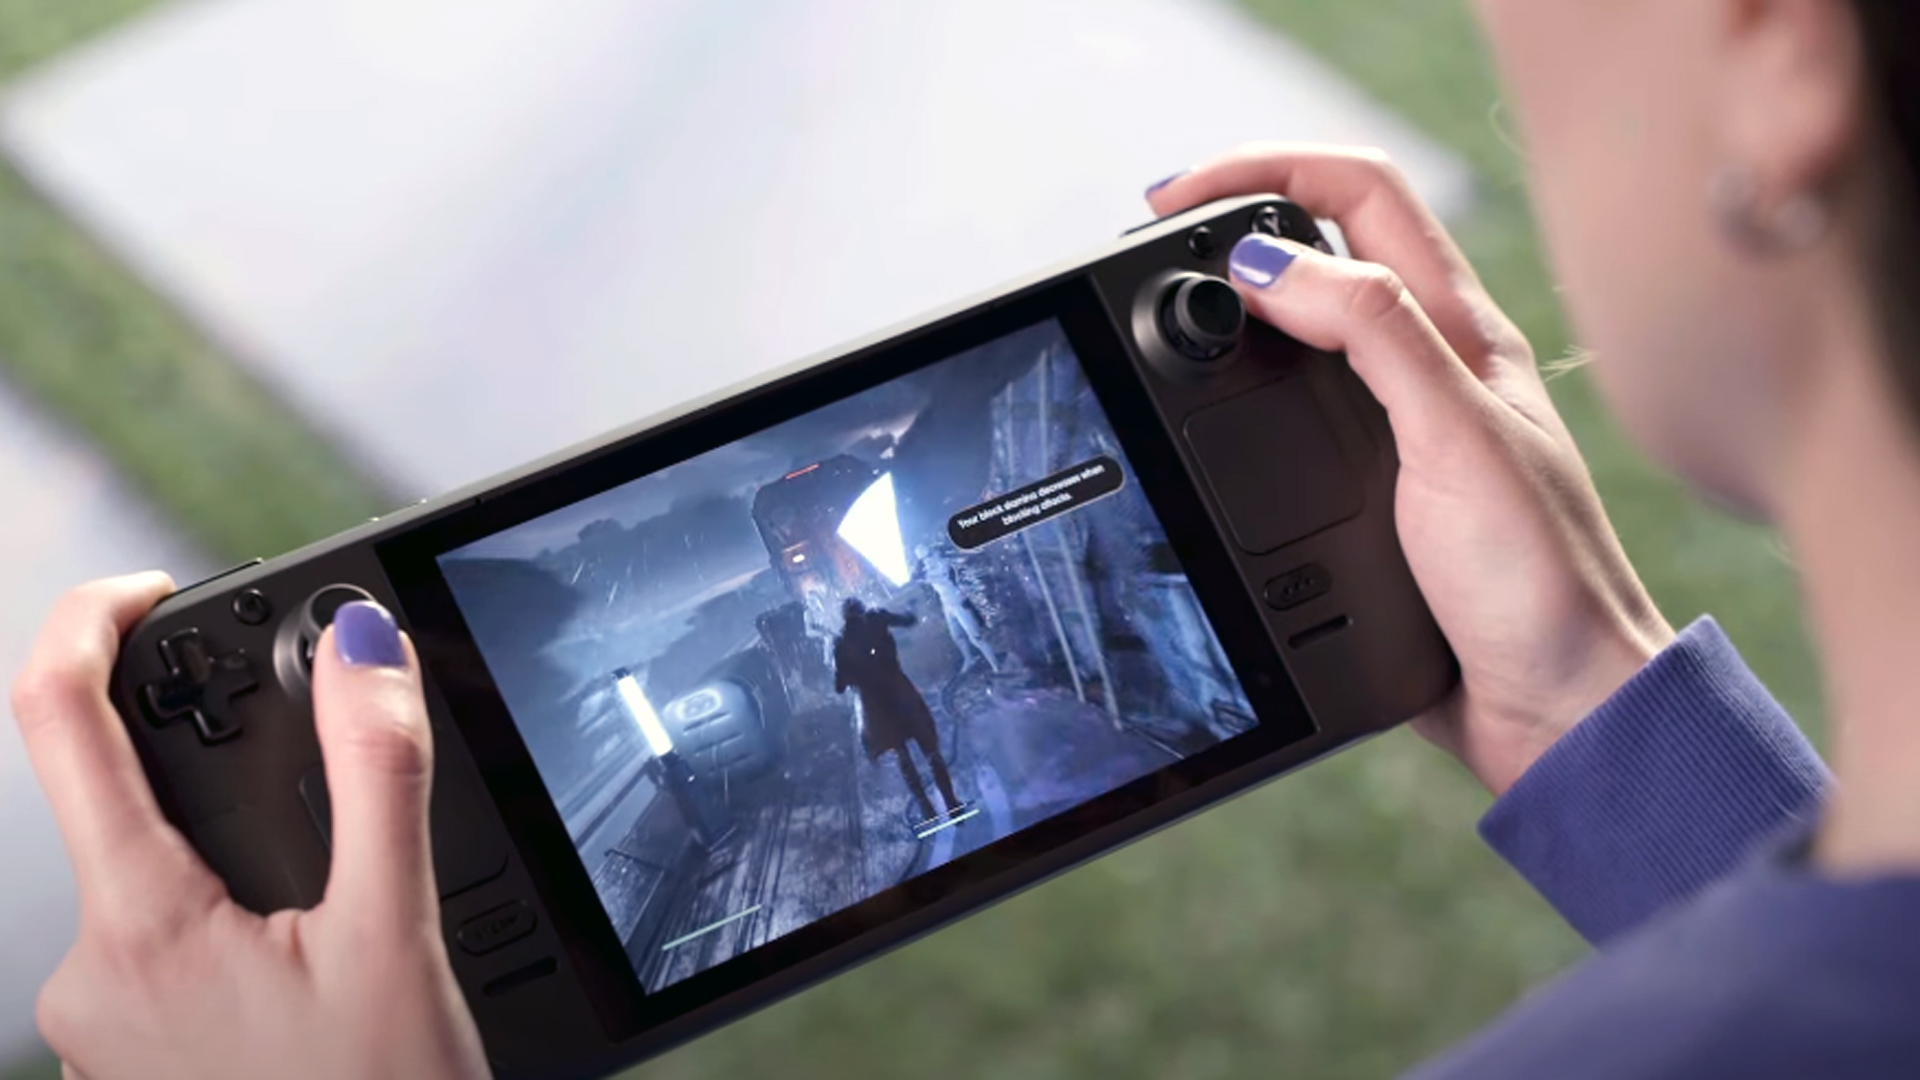 Steam Deck’s first ad proclaims it “the most powerful gaming handheld in the world”